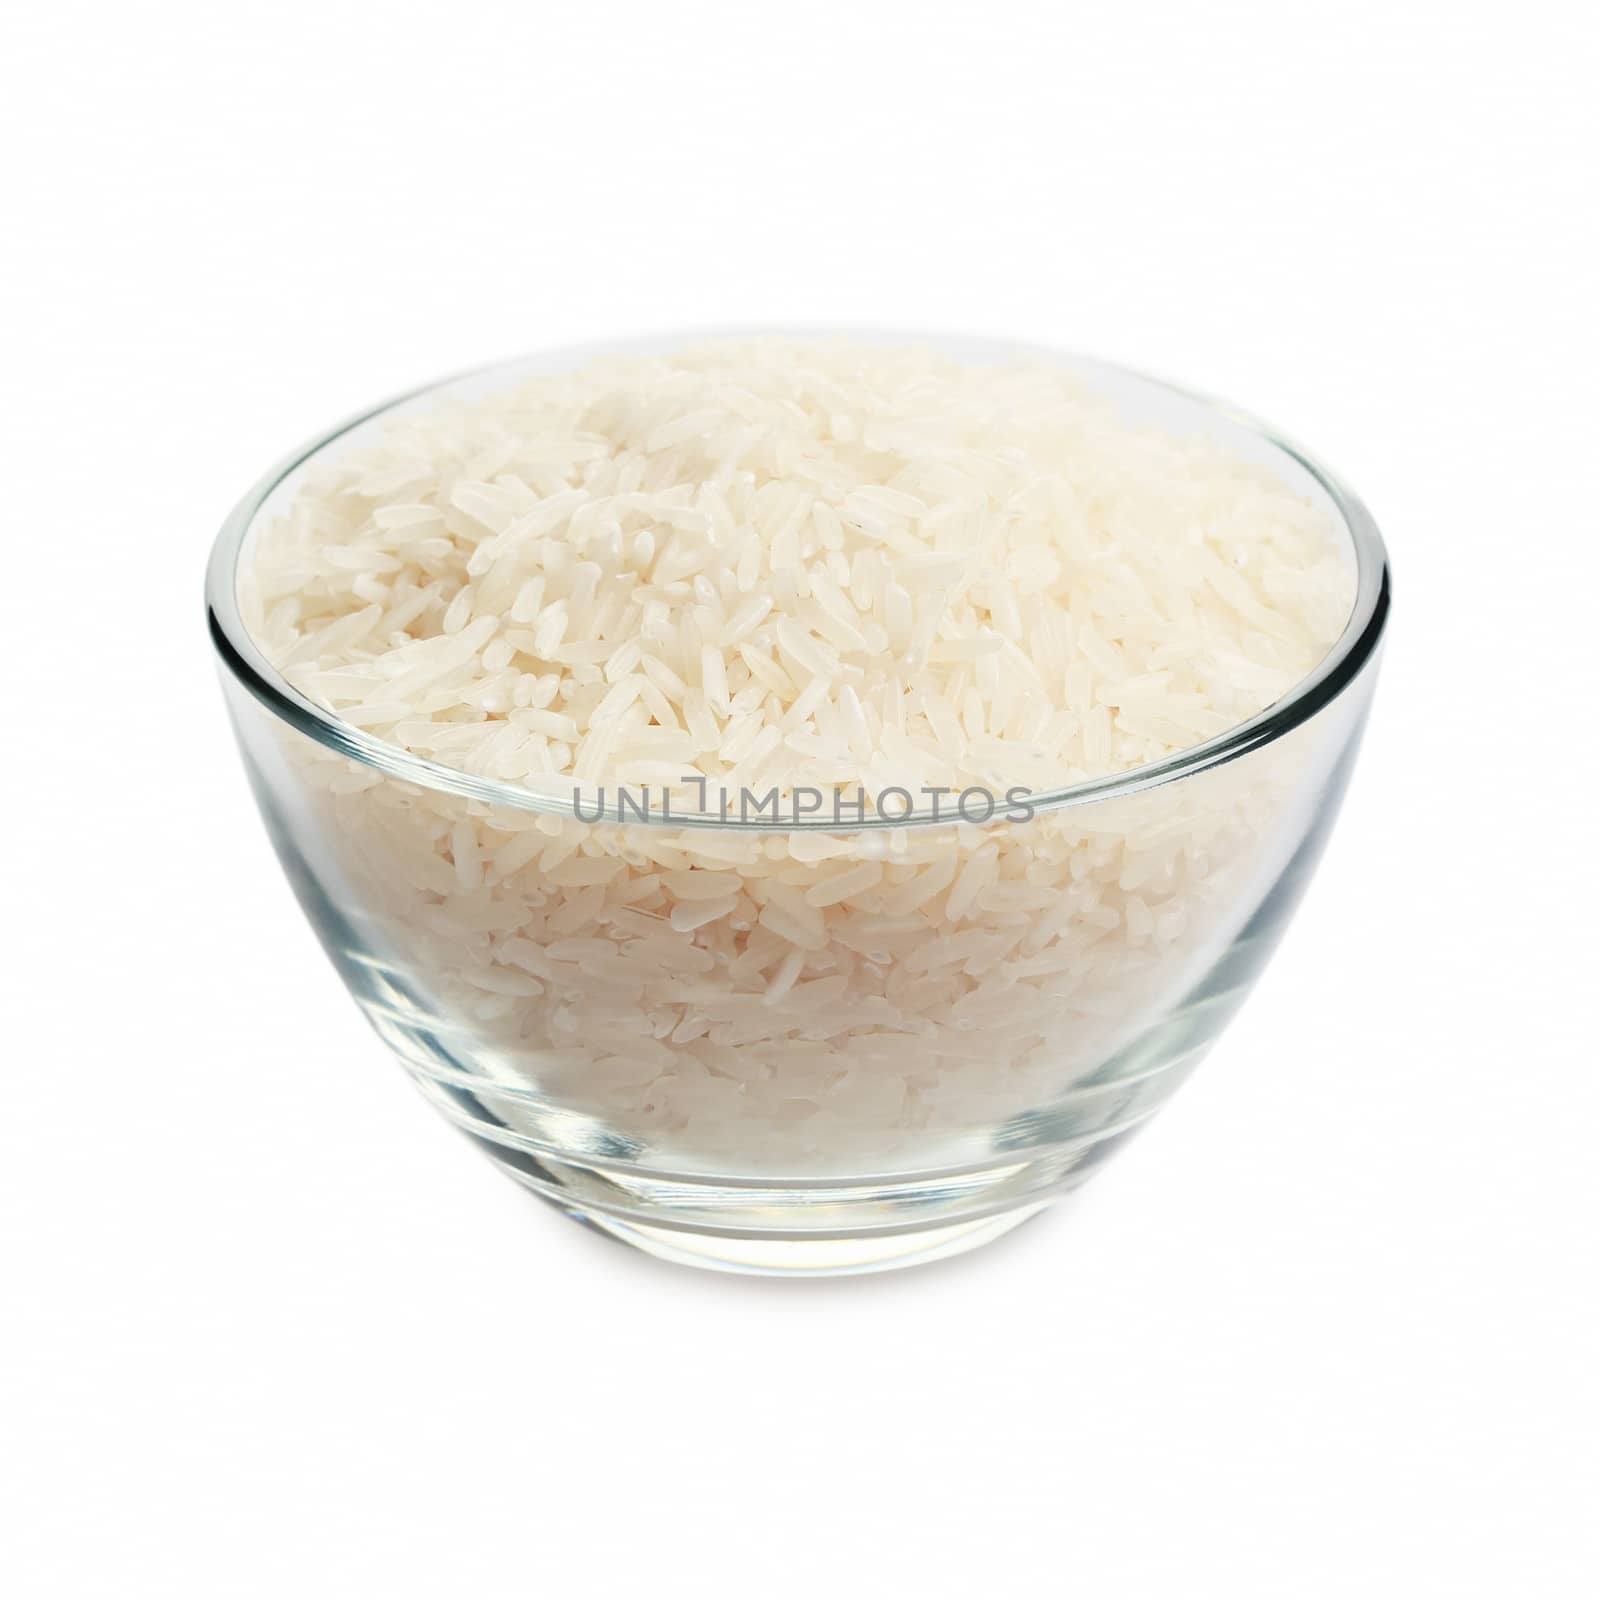 White rice in glass bowl isolated on white background.